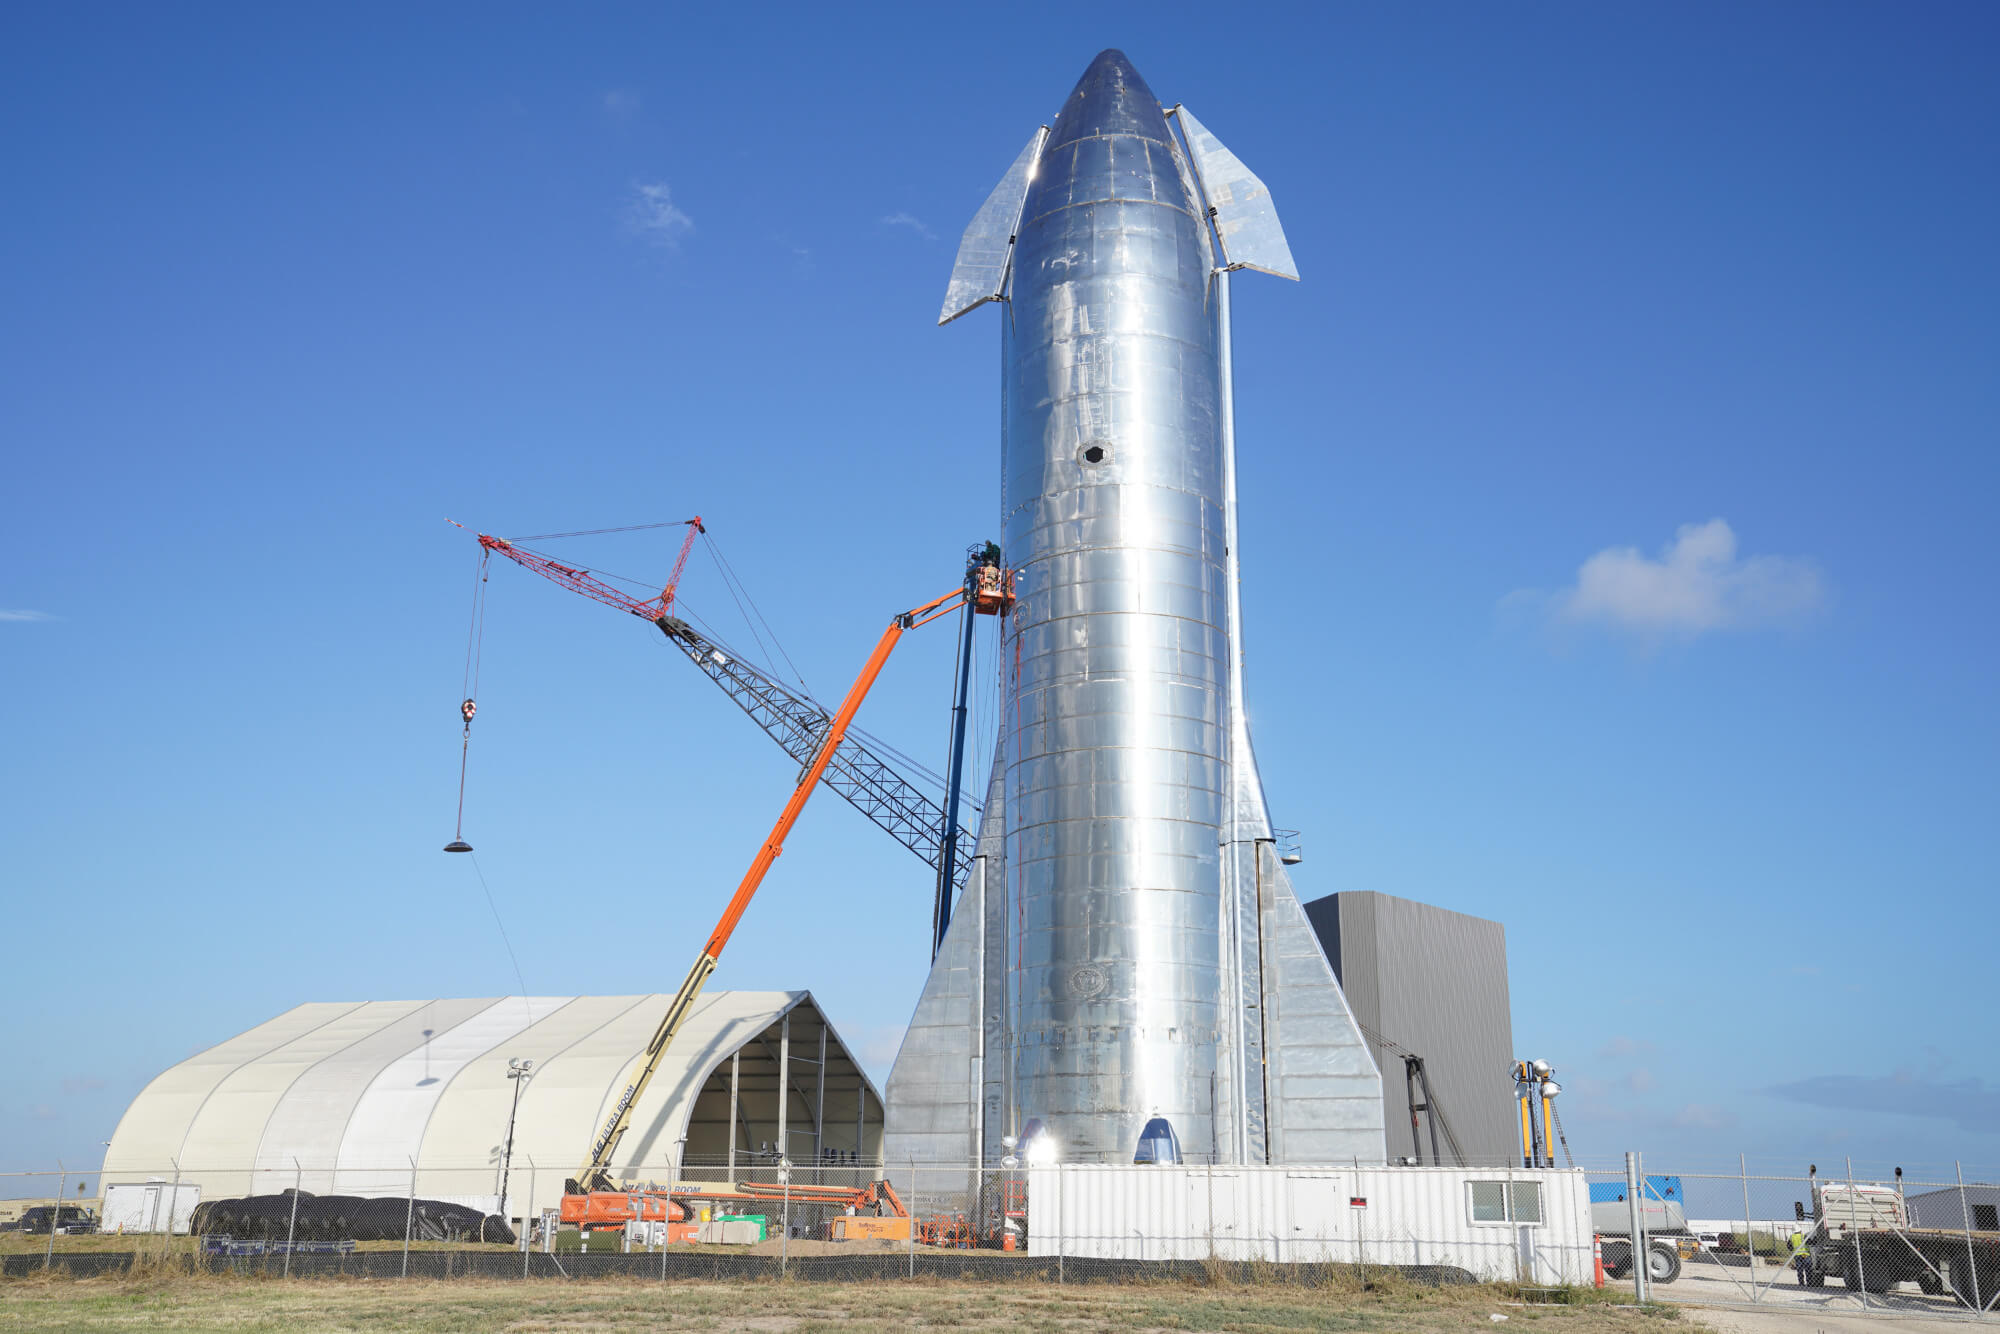 SpaceX plans high-altitude test flight for its SN8 starship next week